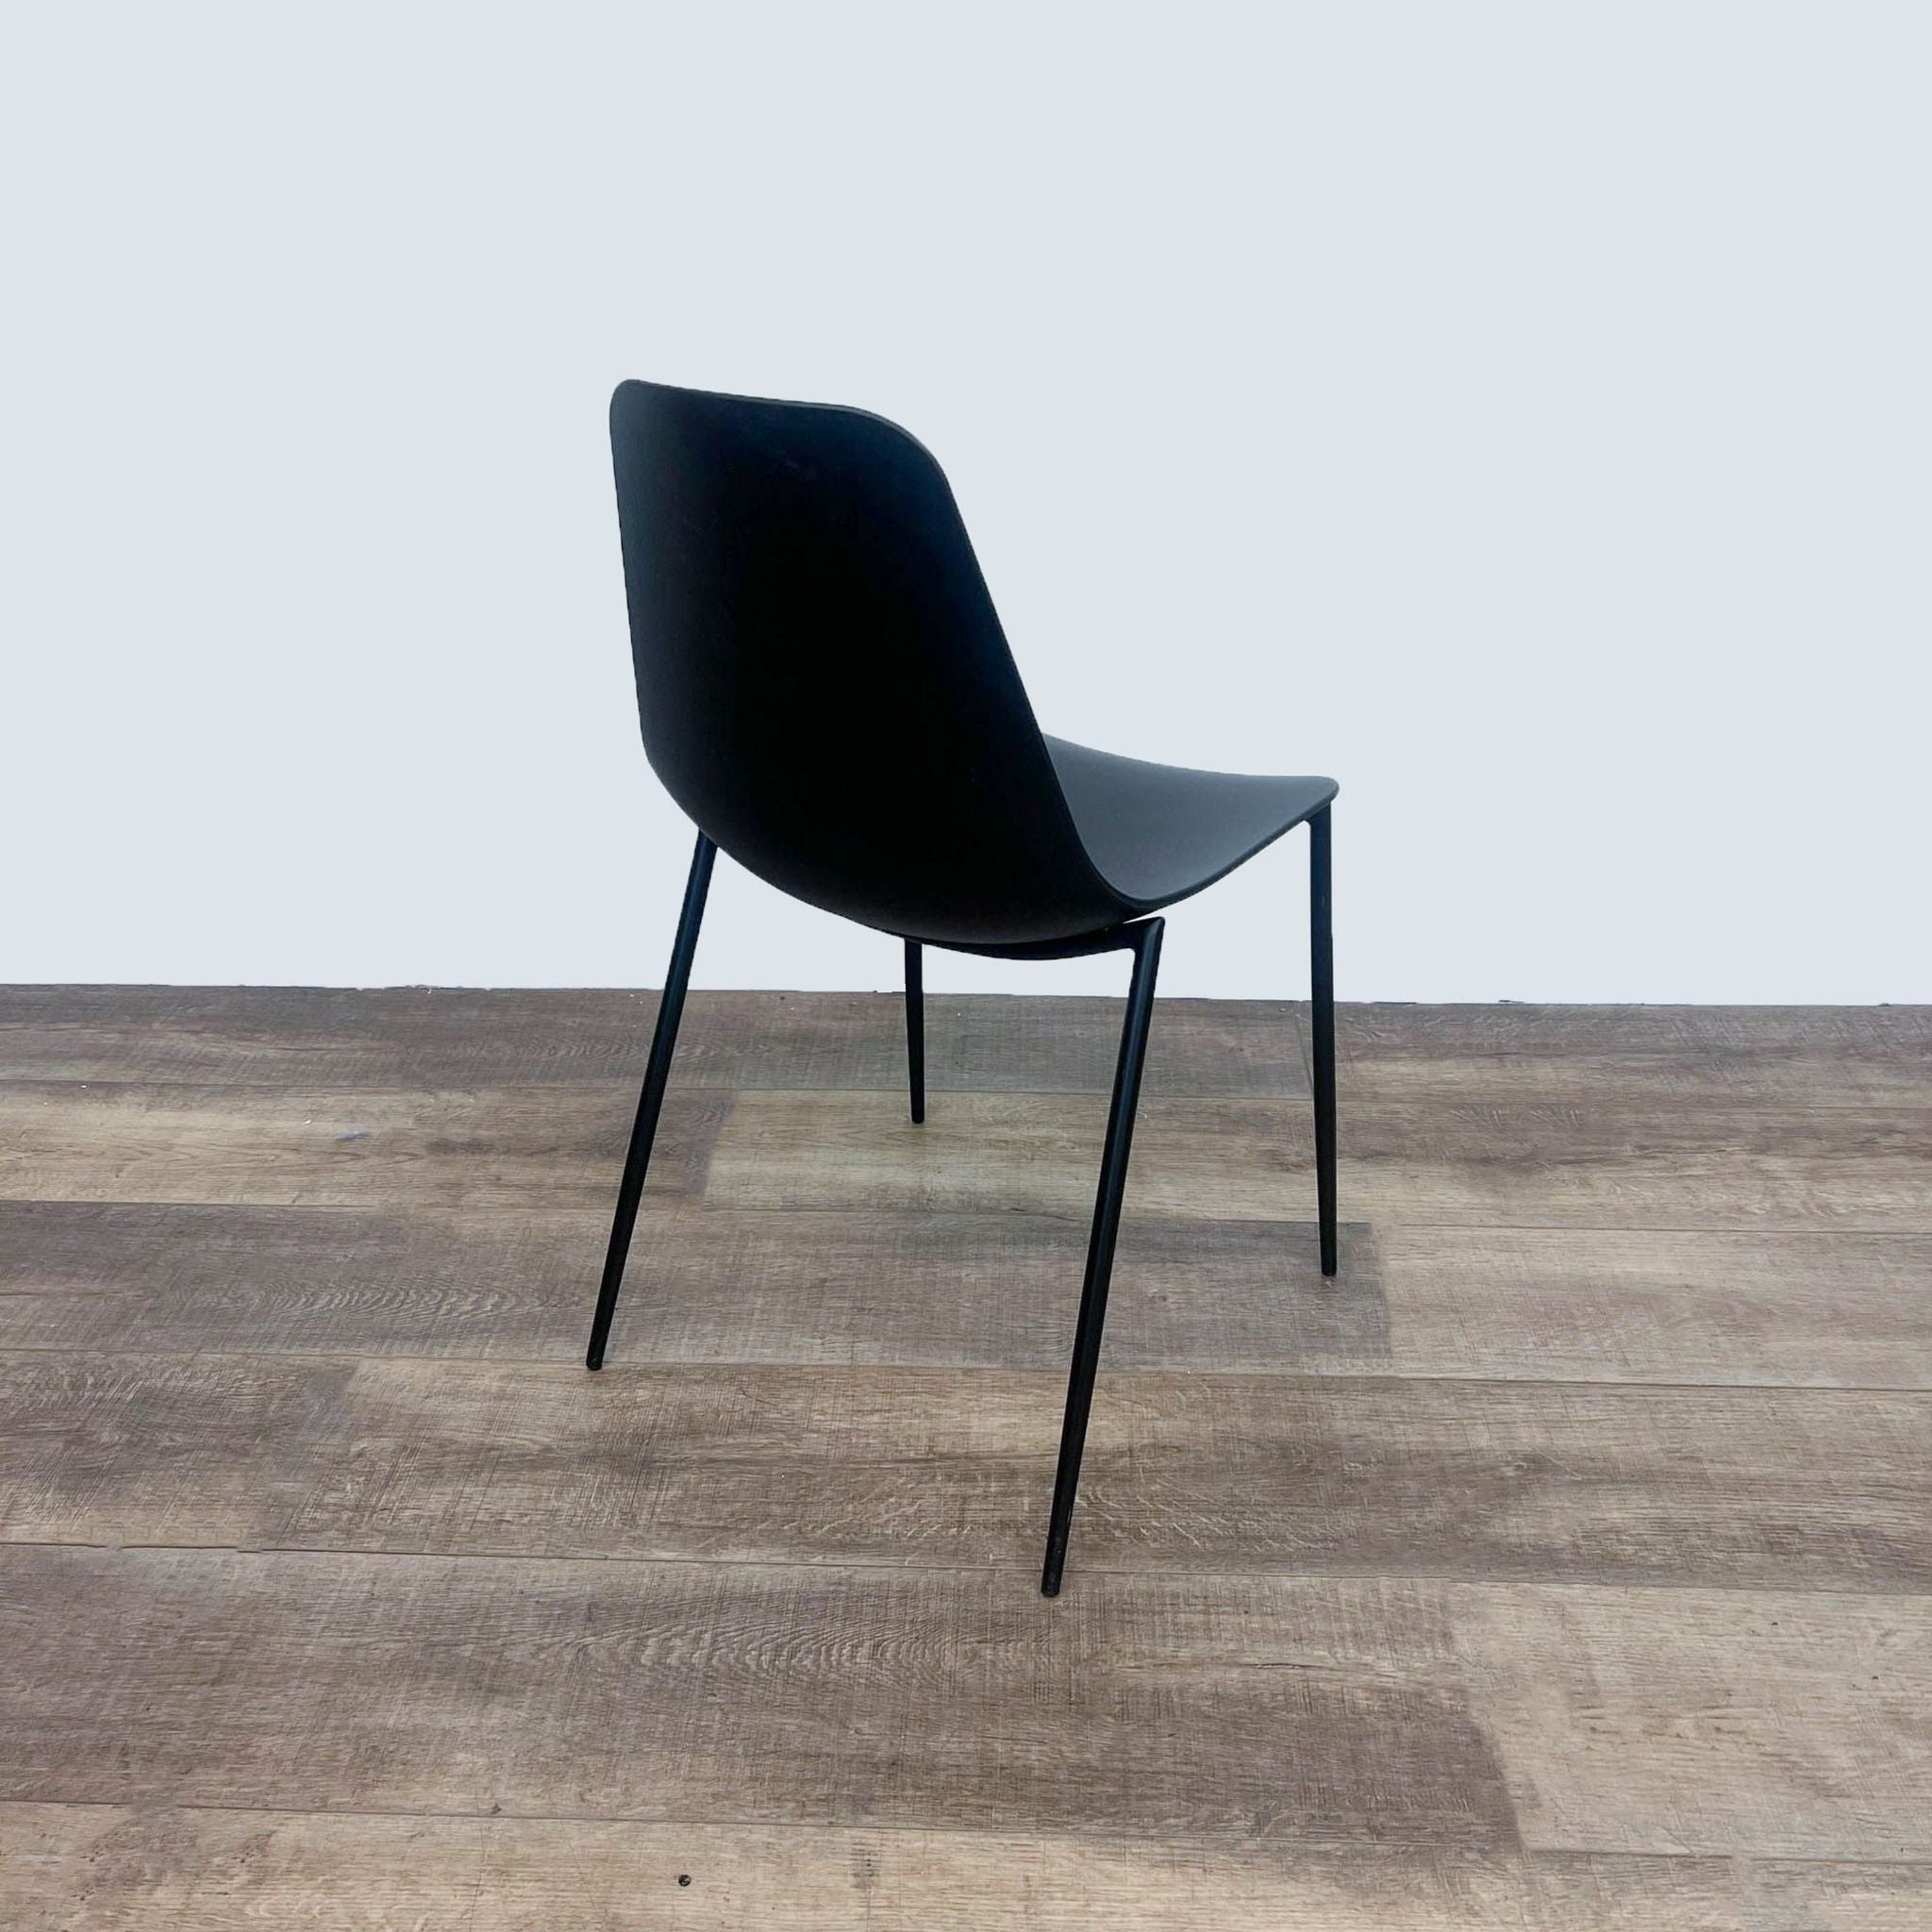 Black Reperch modern dining chair with a contoured plastic seat and metal legs on a wooden floor.